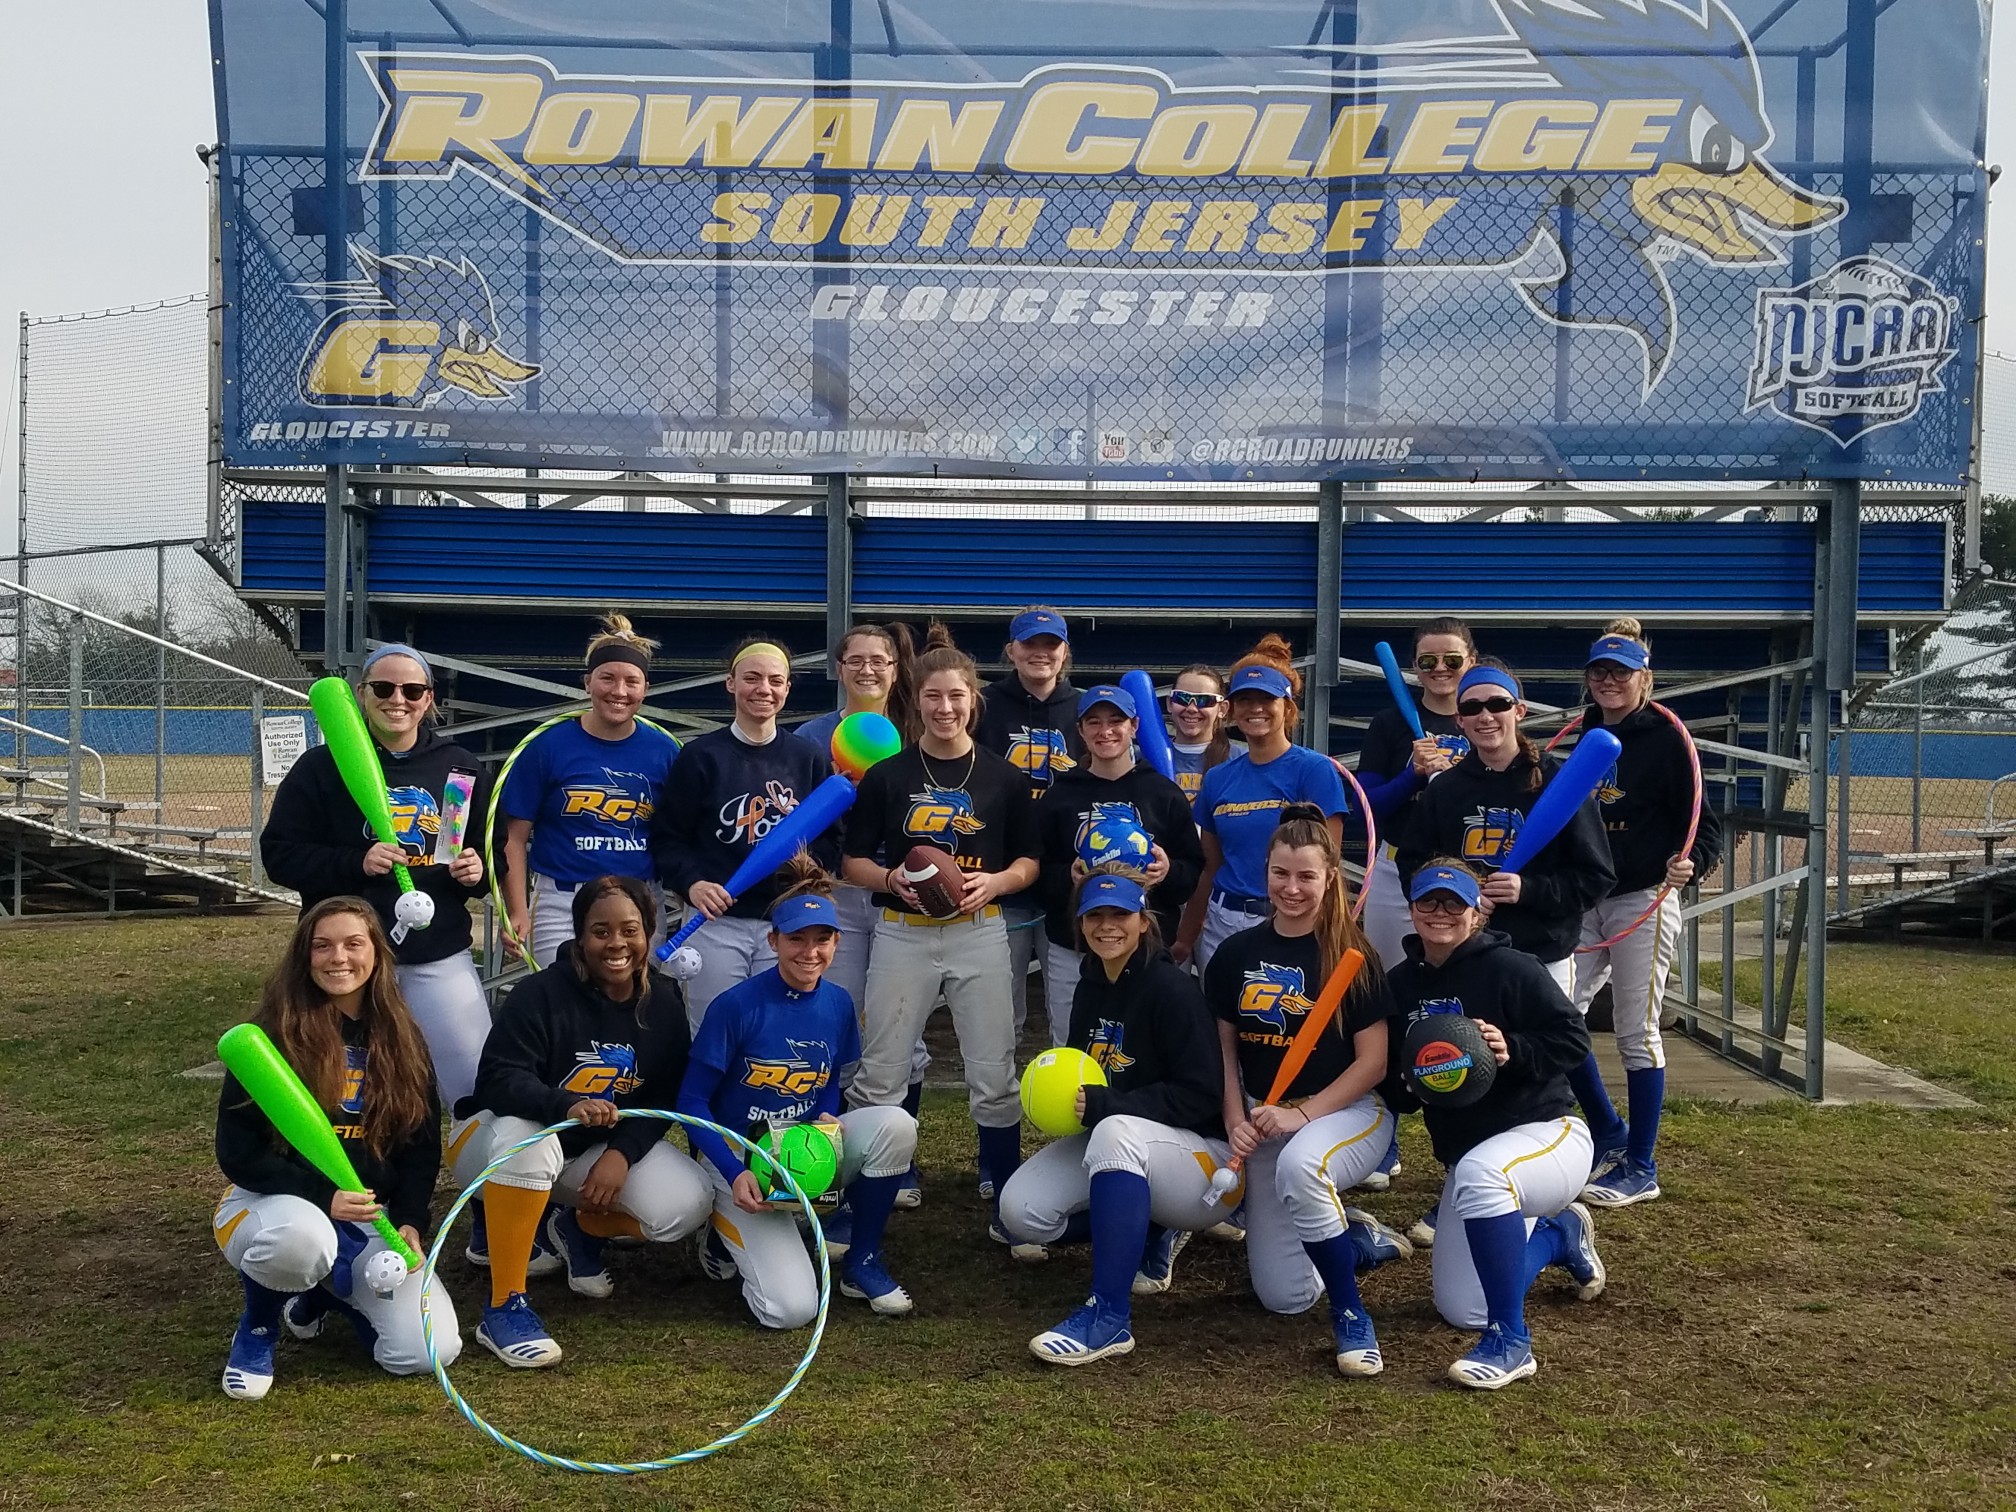 The pandemic couldn’t bench the RCSJ softball team when it came to uplifting the spirits of Apollo Elementary School students in Florida. Roadrunner student athletes include: Lacey Abrego, Kylie Abriola, Julianna Capasso, Brooke Cooper, Olivia Farina, Sabrina Finneran, Grace Fox, Paige Fox, Mackenzie Freas, Jill Frisone, Molly Kurz, Victoria London, Macenzie Long, Kelsee Murphy, Angelina Picozzi, Makenzie Ponto, Kaylee Smallets and Leigh Swietanski.